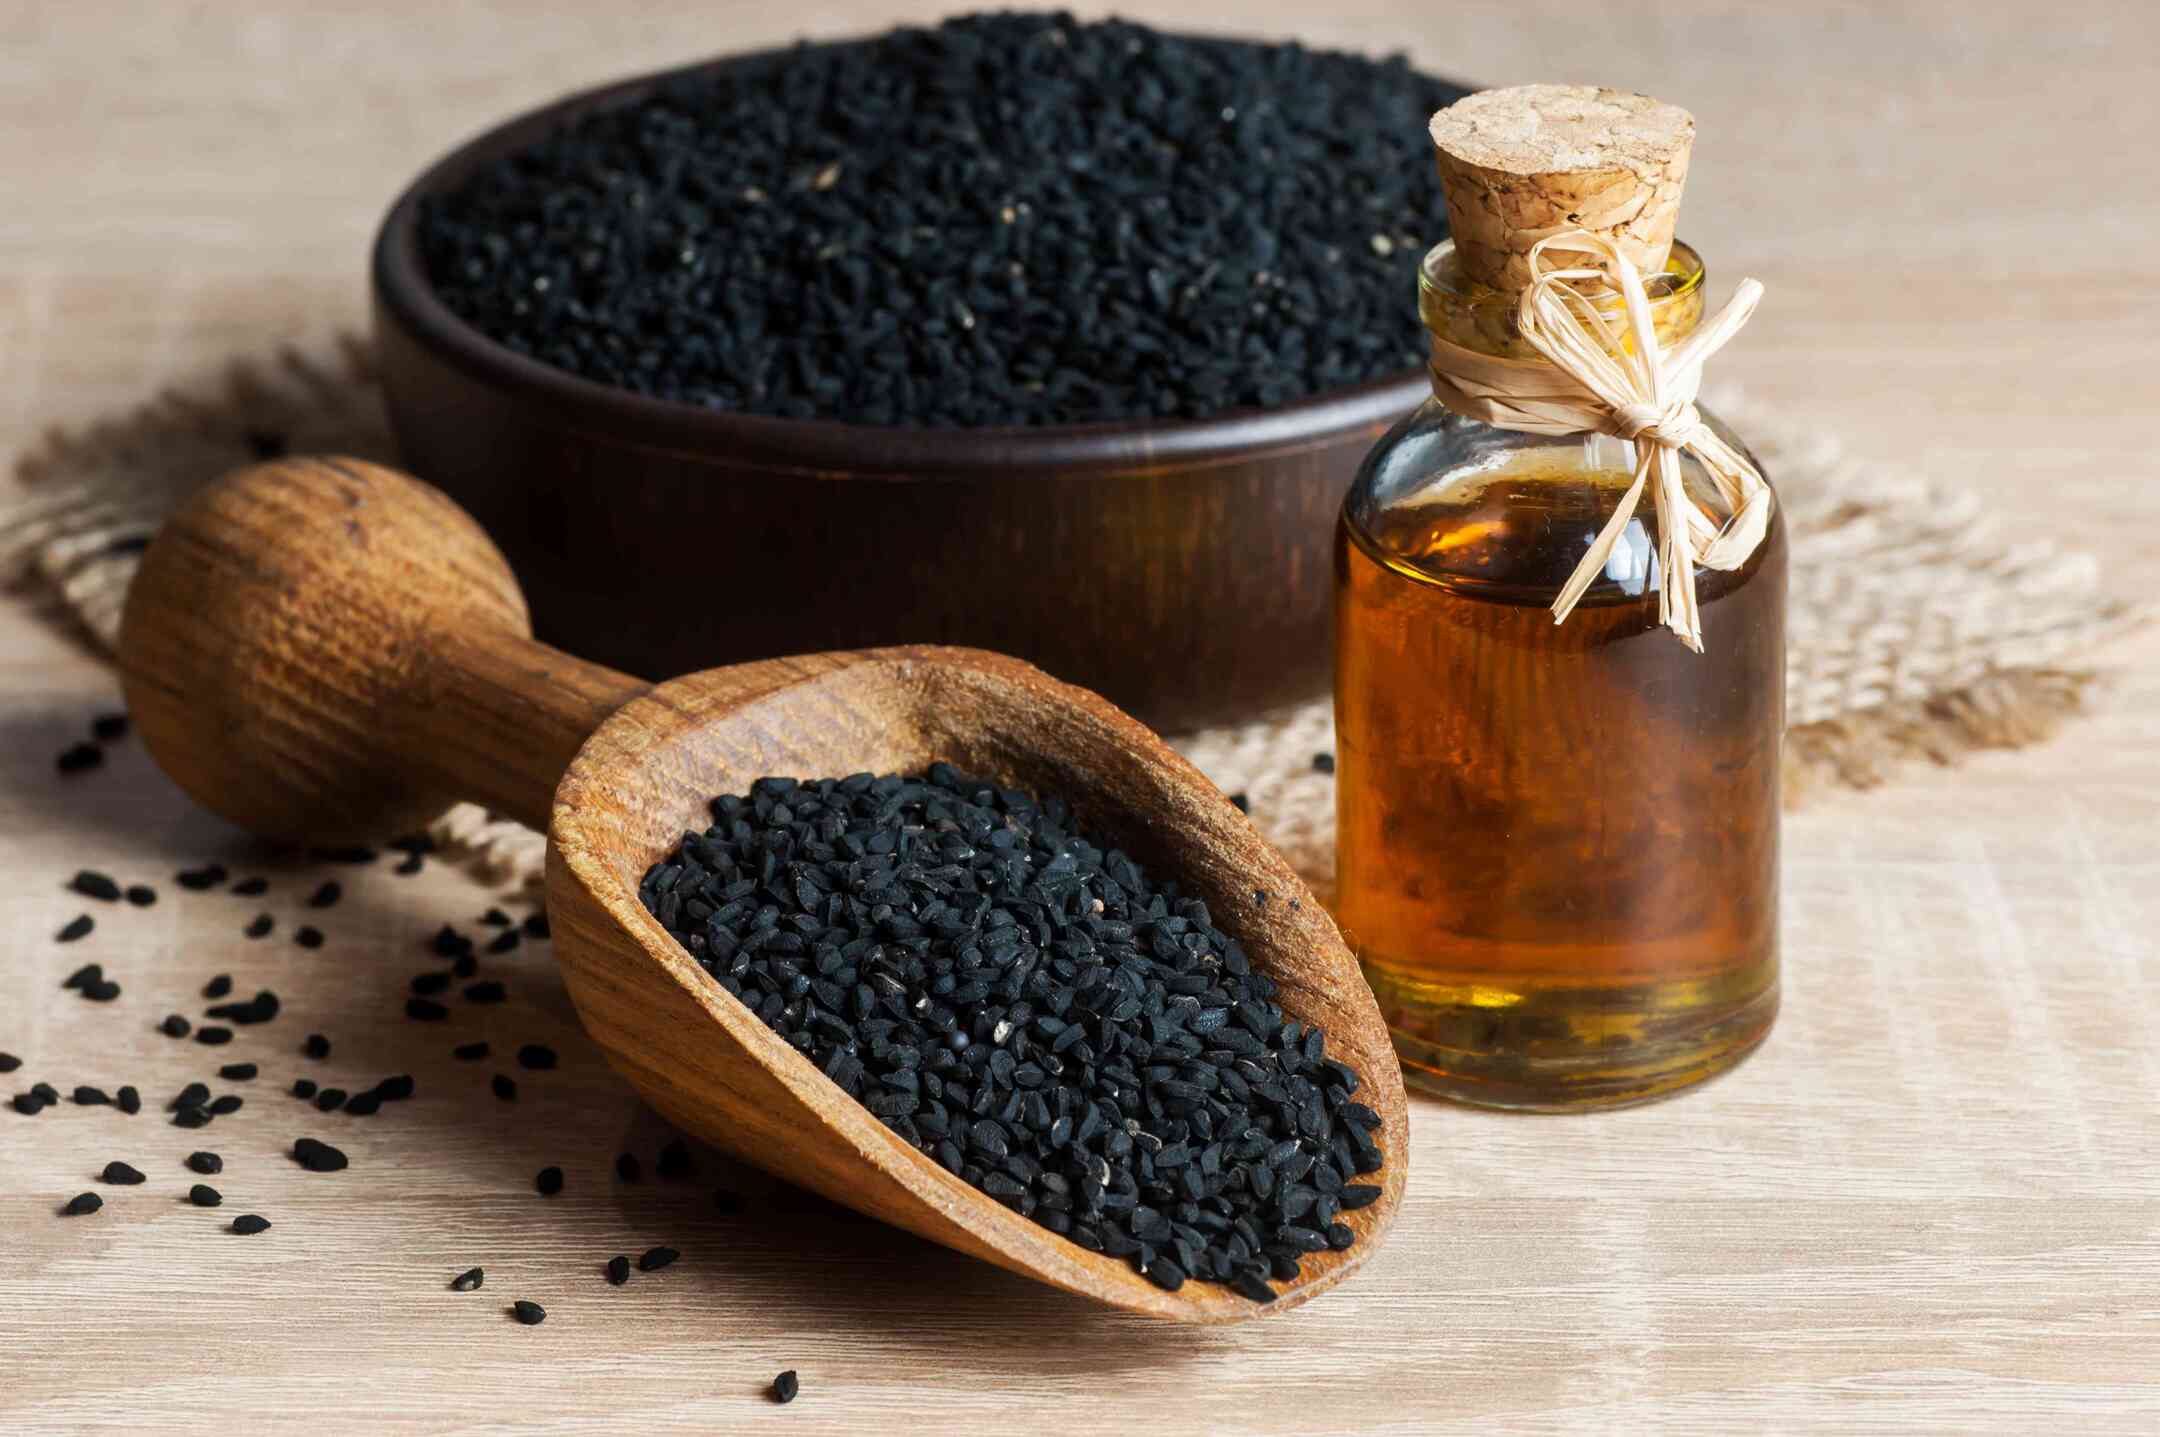 How To Use Black Seed Oil On Hair